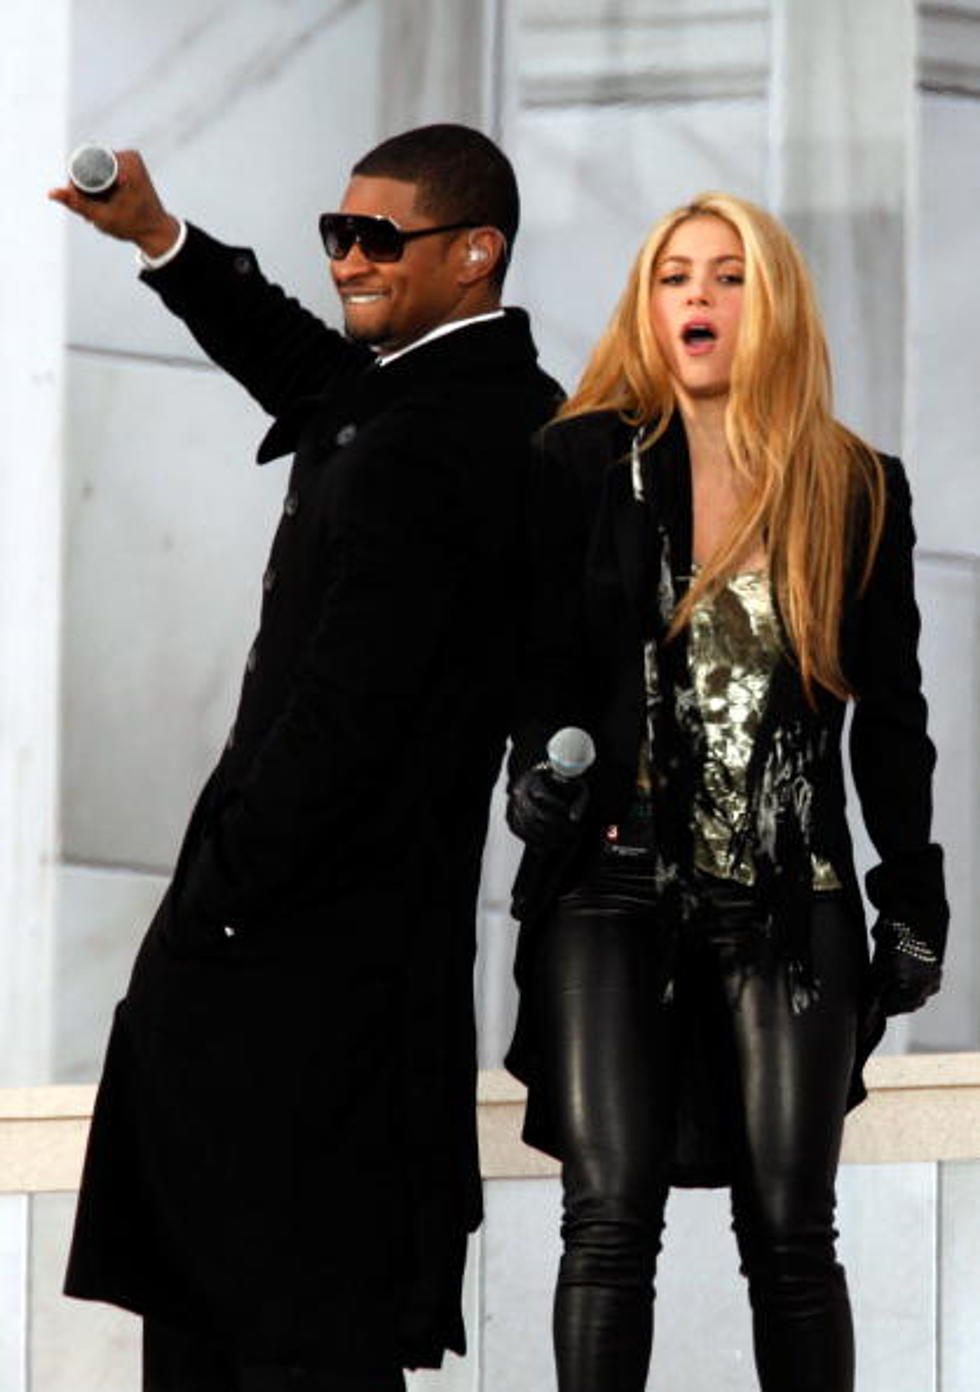 Usher + Shakira To Replace Cee-Lo & Christina On ‘The Voice’